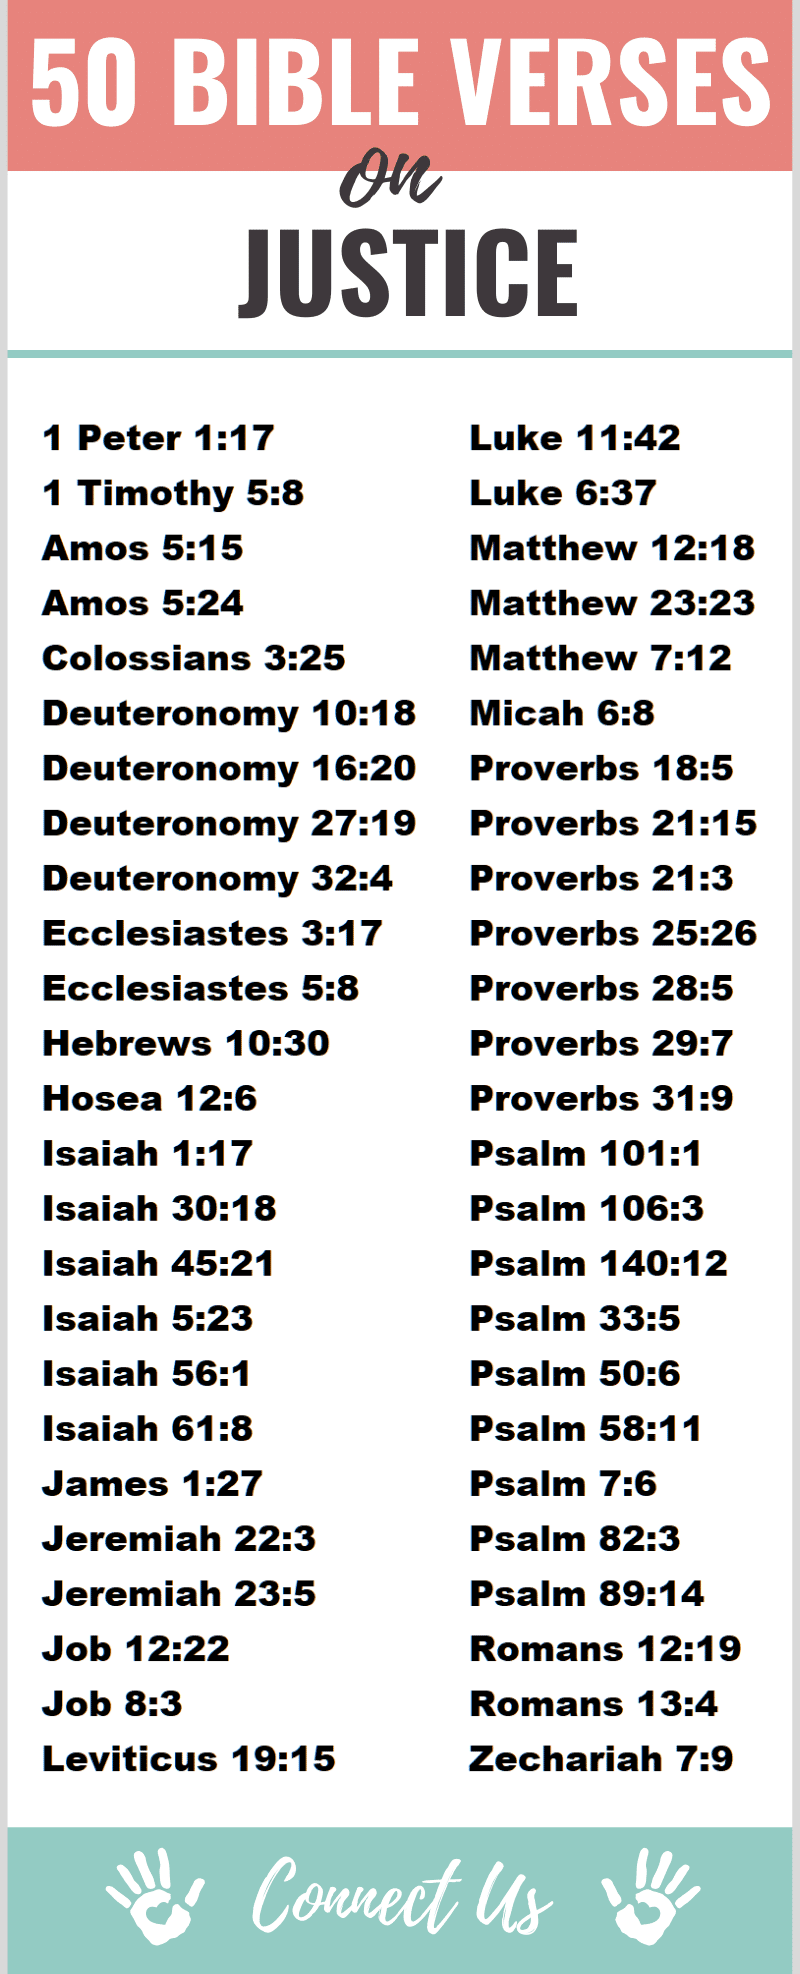 Bible Verses on Justice